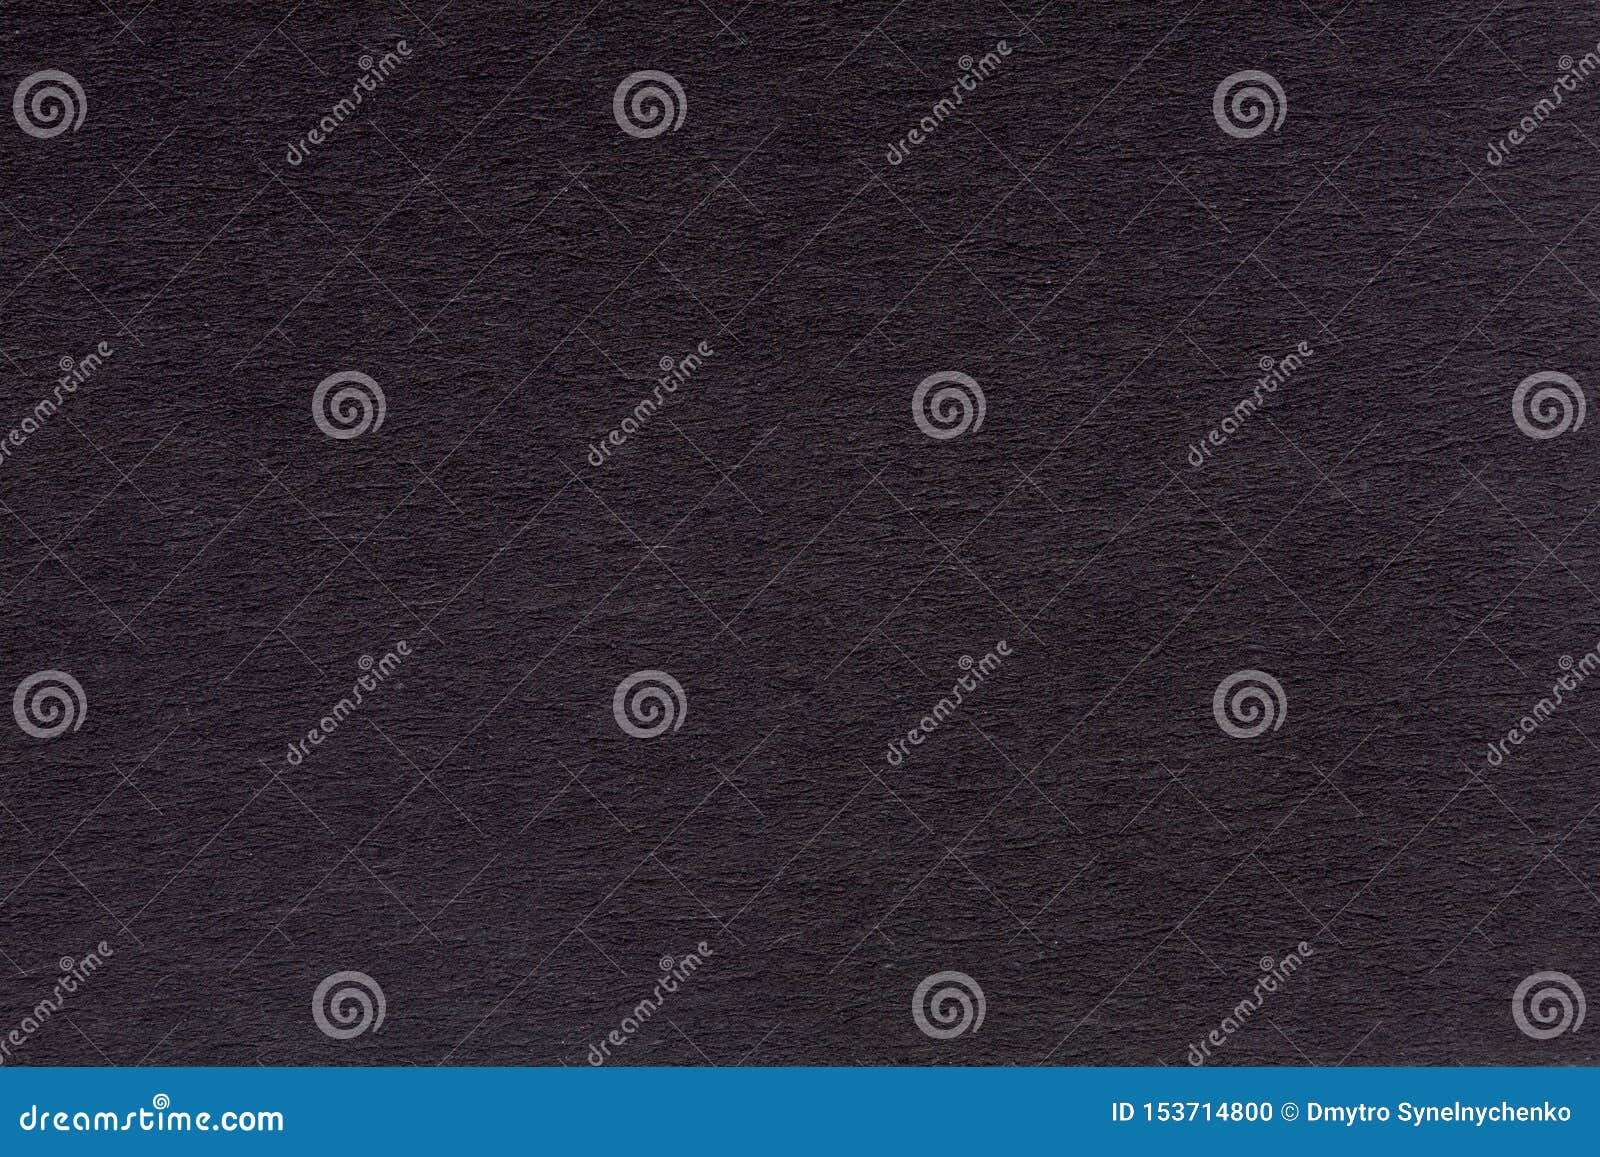 Black Paper Close Up. High Quality Texture in Extremely High Resolution ...